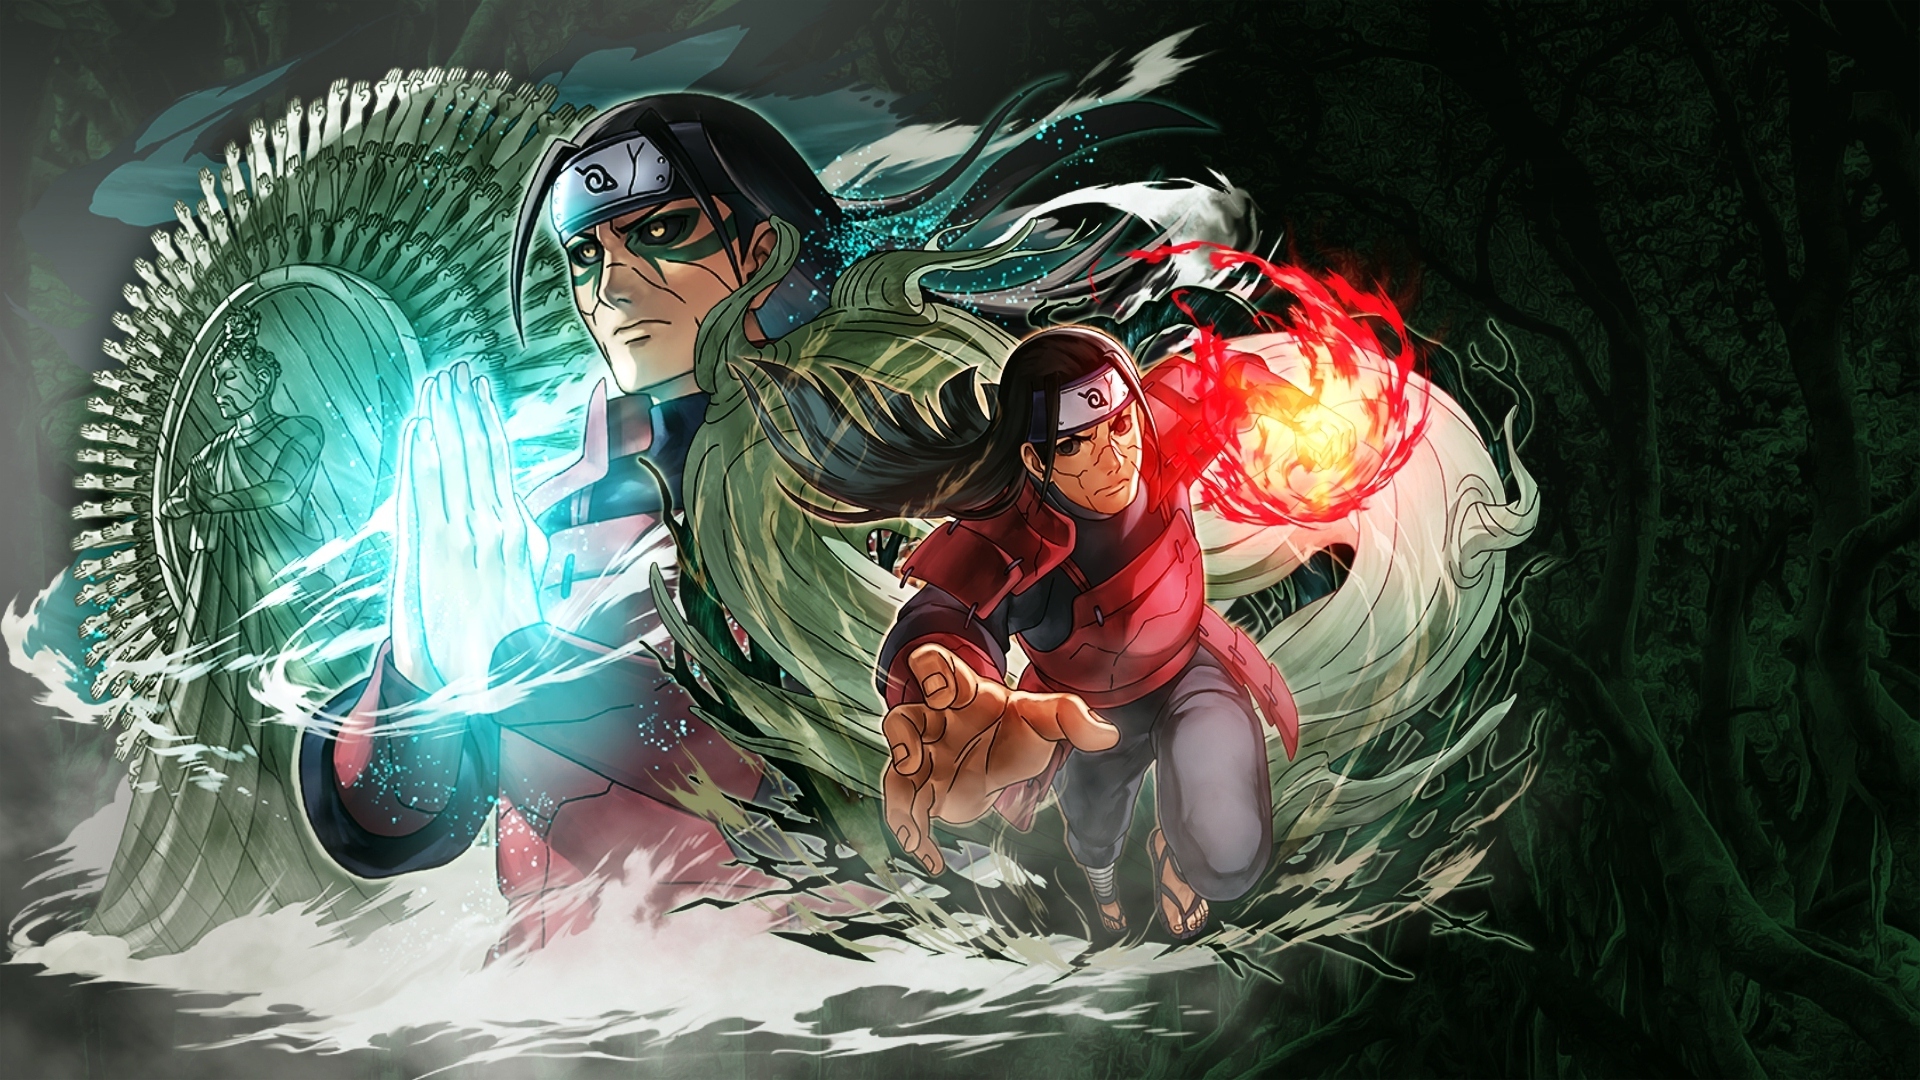 19 Hashirama Senju Wallpapers for iPhone and Android by Sarah Reed